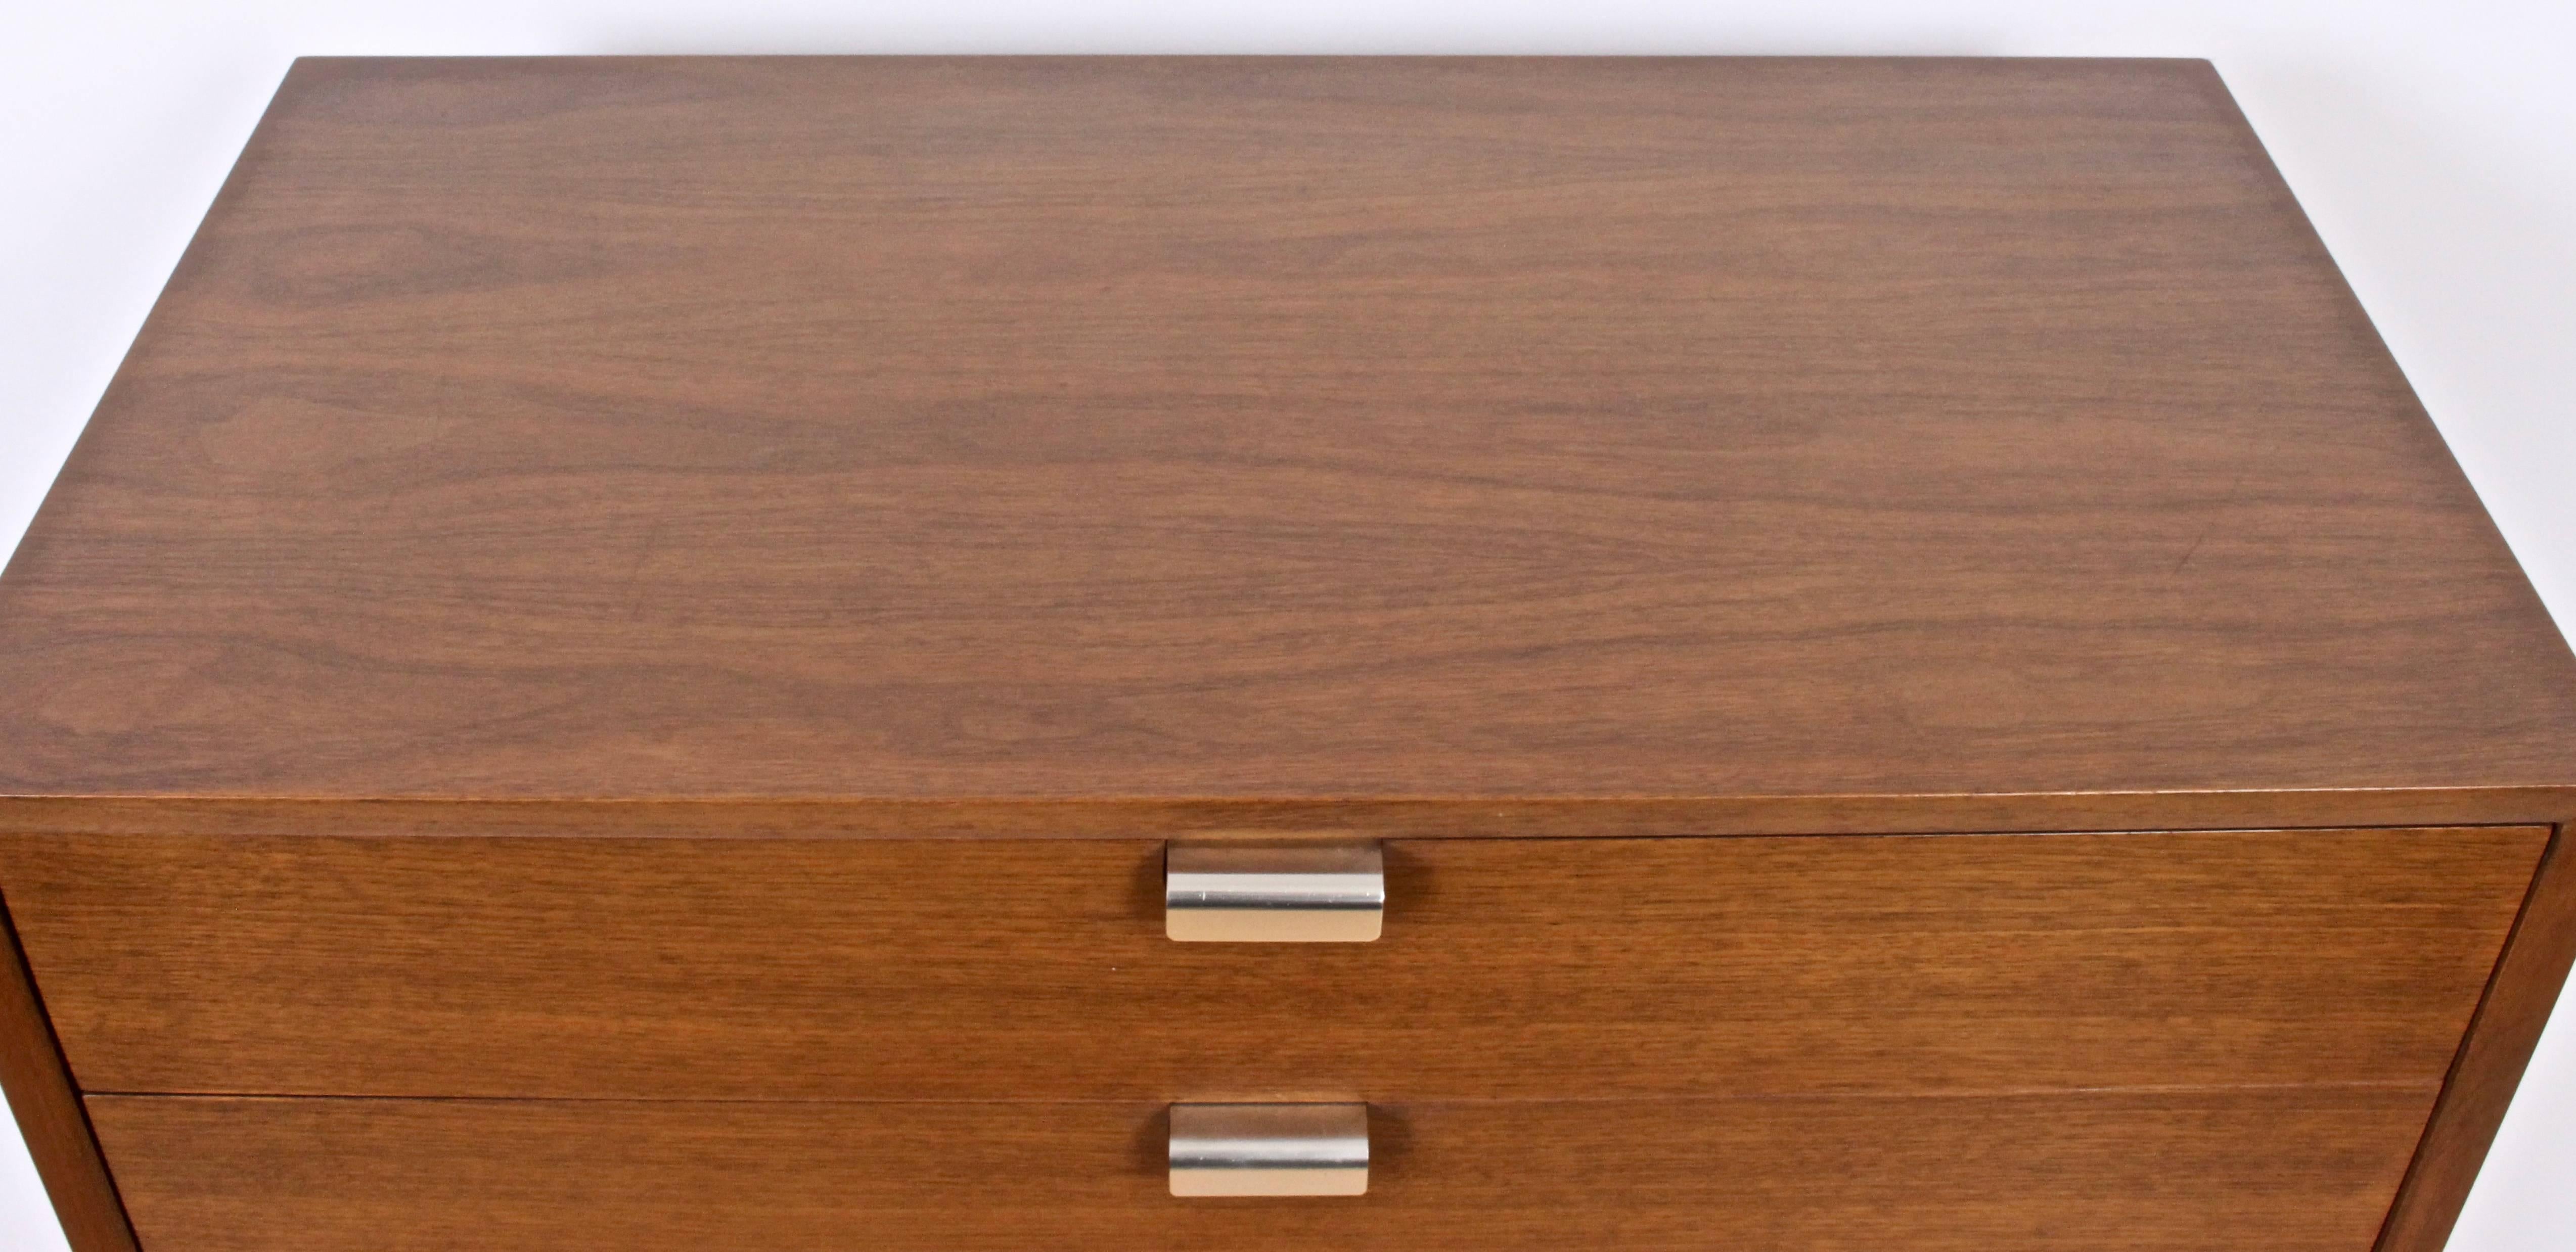 Pair of 1950s George Nelson for Herman Miller four-drawer Walnut Nightstands. With Herman Miller marked Brushed Aluminium J pulls to top drawers. Top drawers with six divided compartments, bottom drawers with two dividers. Drawers slide easily. With